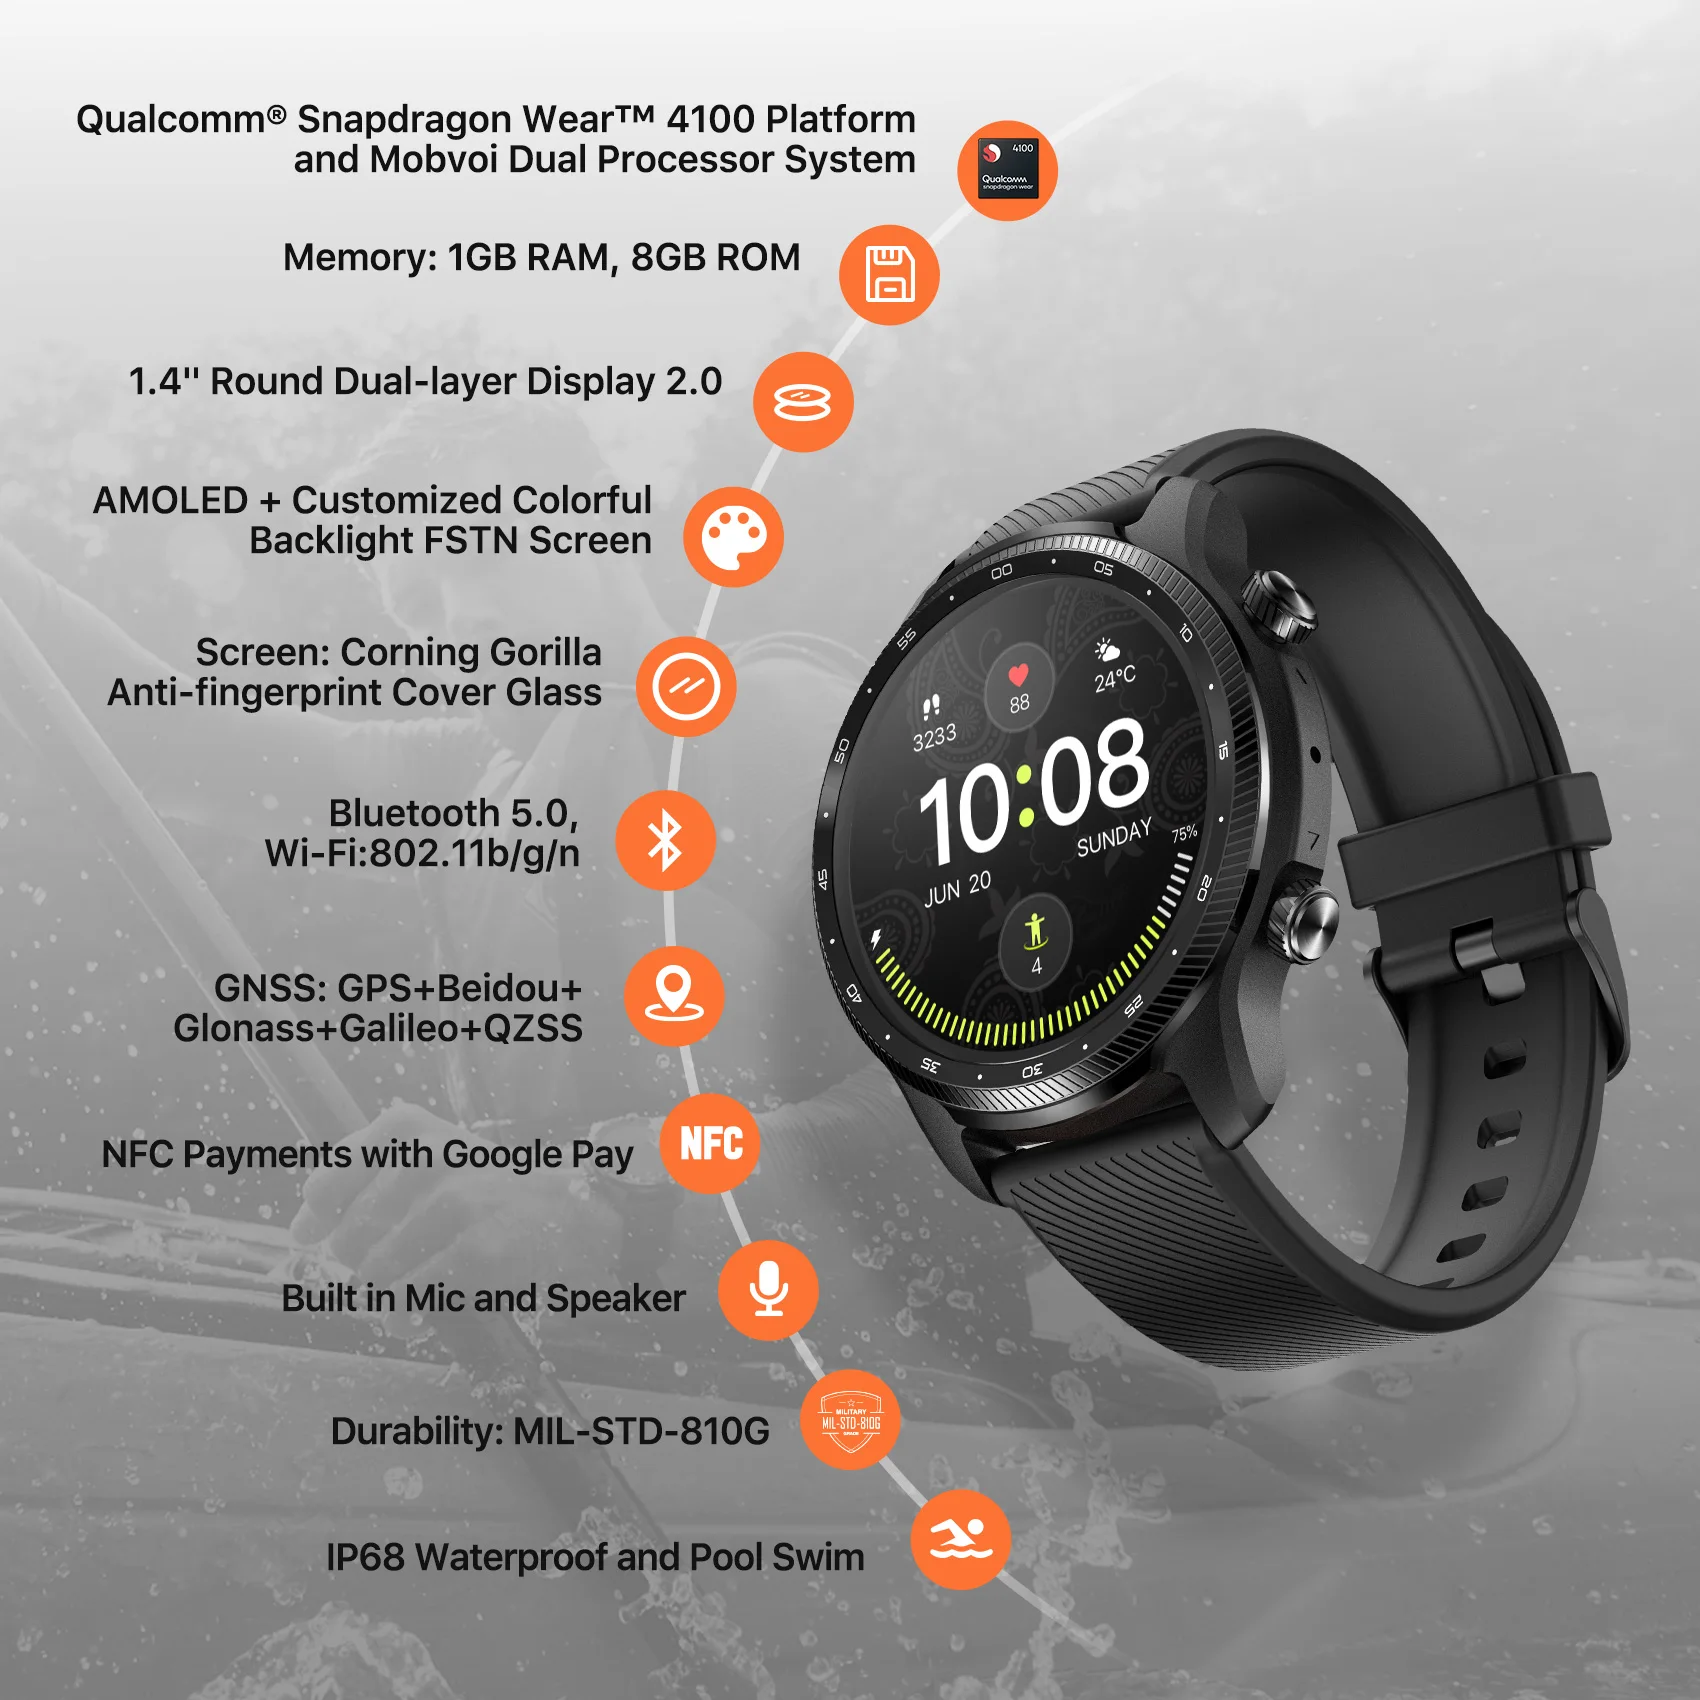 TicWatch Pro 3 Ultra: Advanced Wear OS Smartwatch for Men with Qualcomm 4100 Dual Processor, GPS, Blood Oxygen Monitoring 1